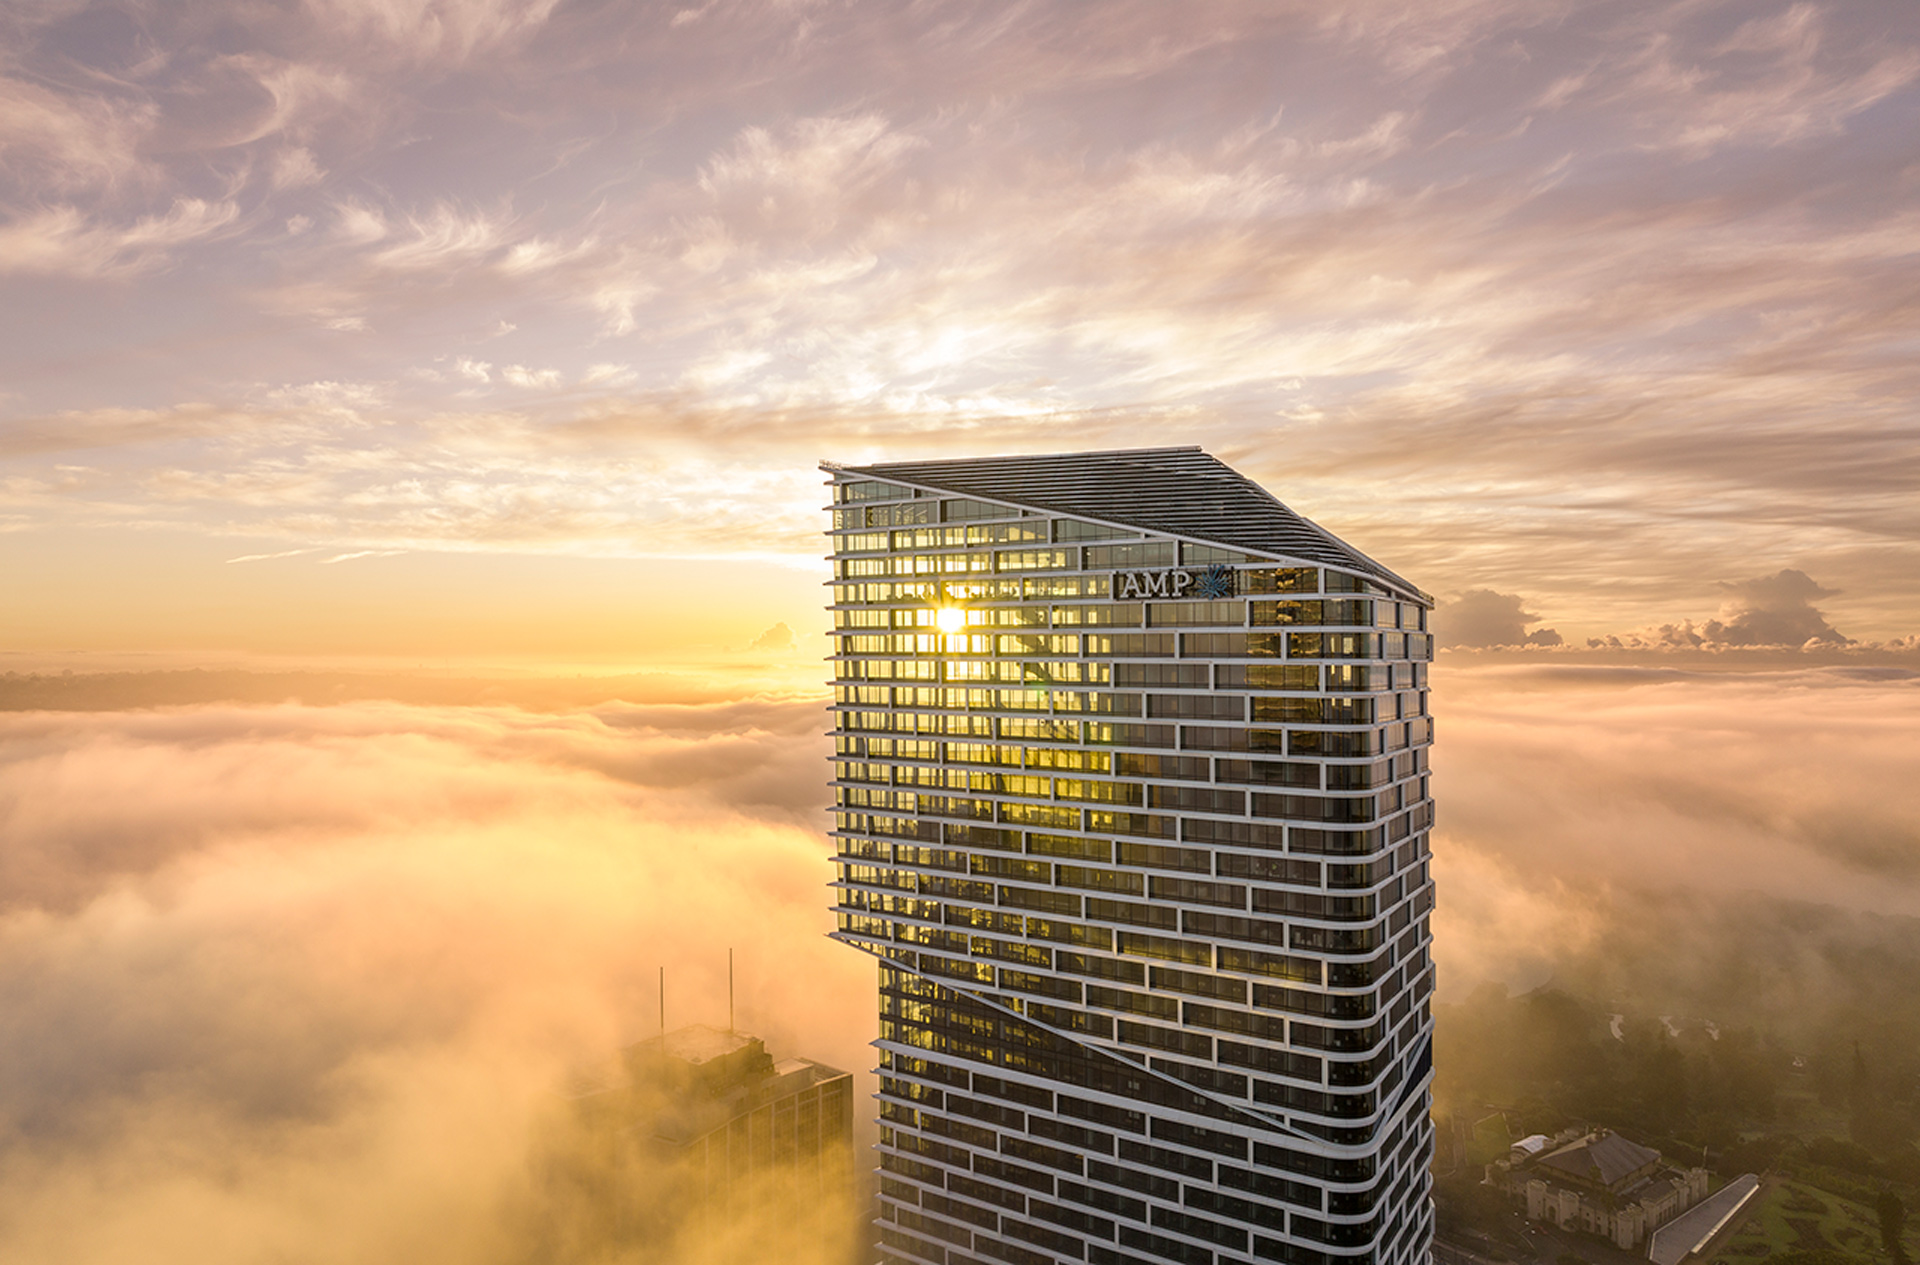 3xn's quay quarter tower best building in the world waf | 3XN